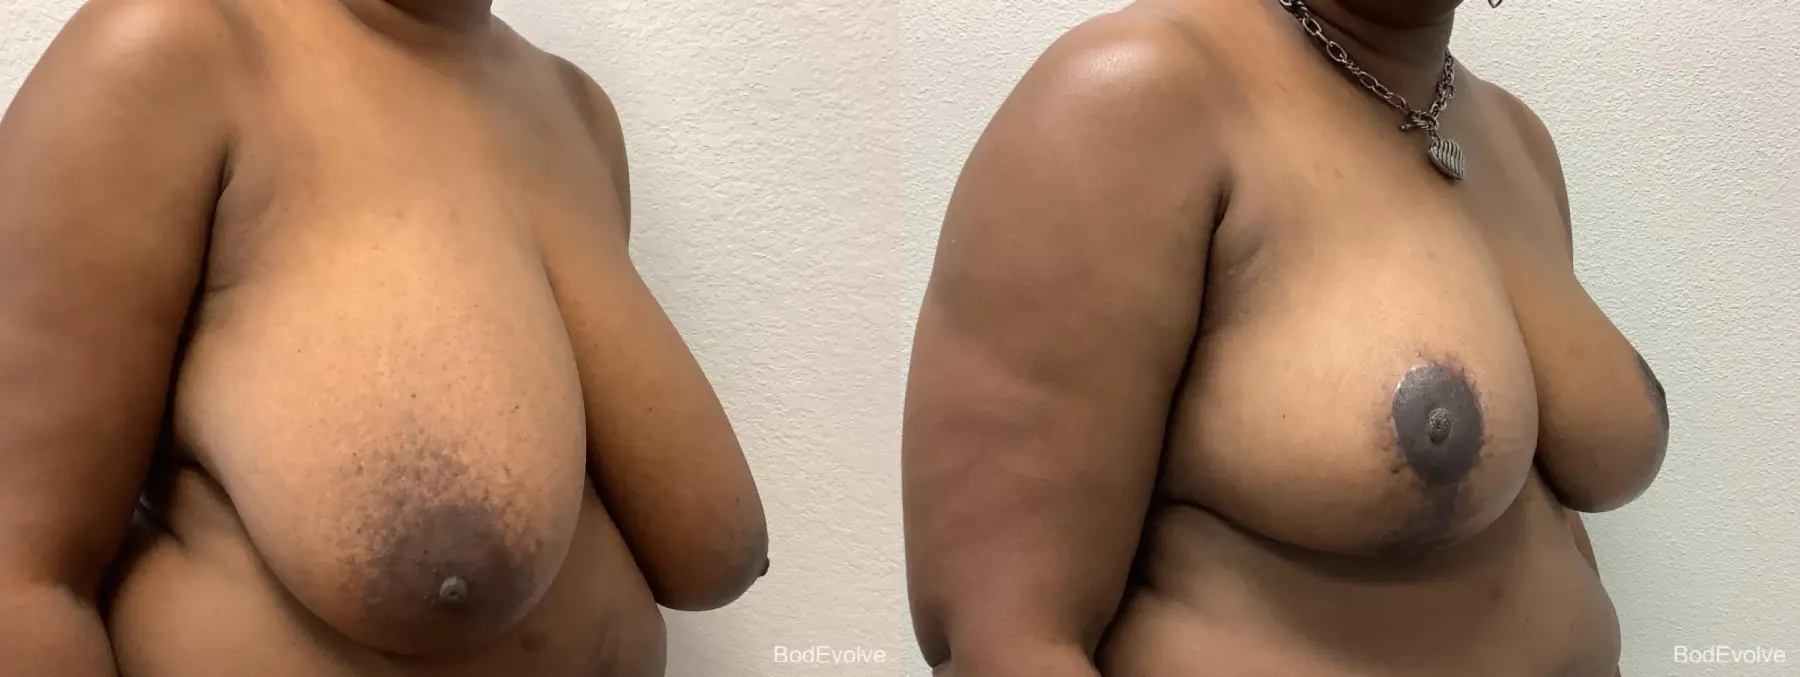 Breast Reduction: Patient 5 - Before and After 4